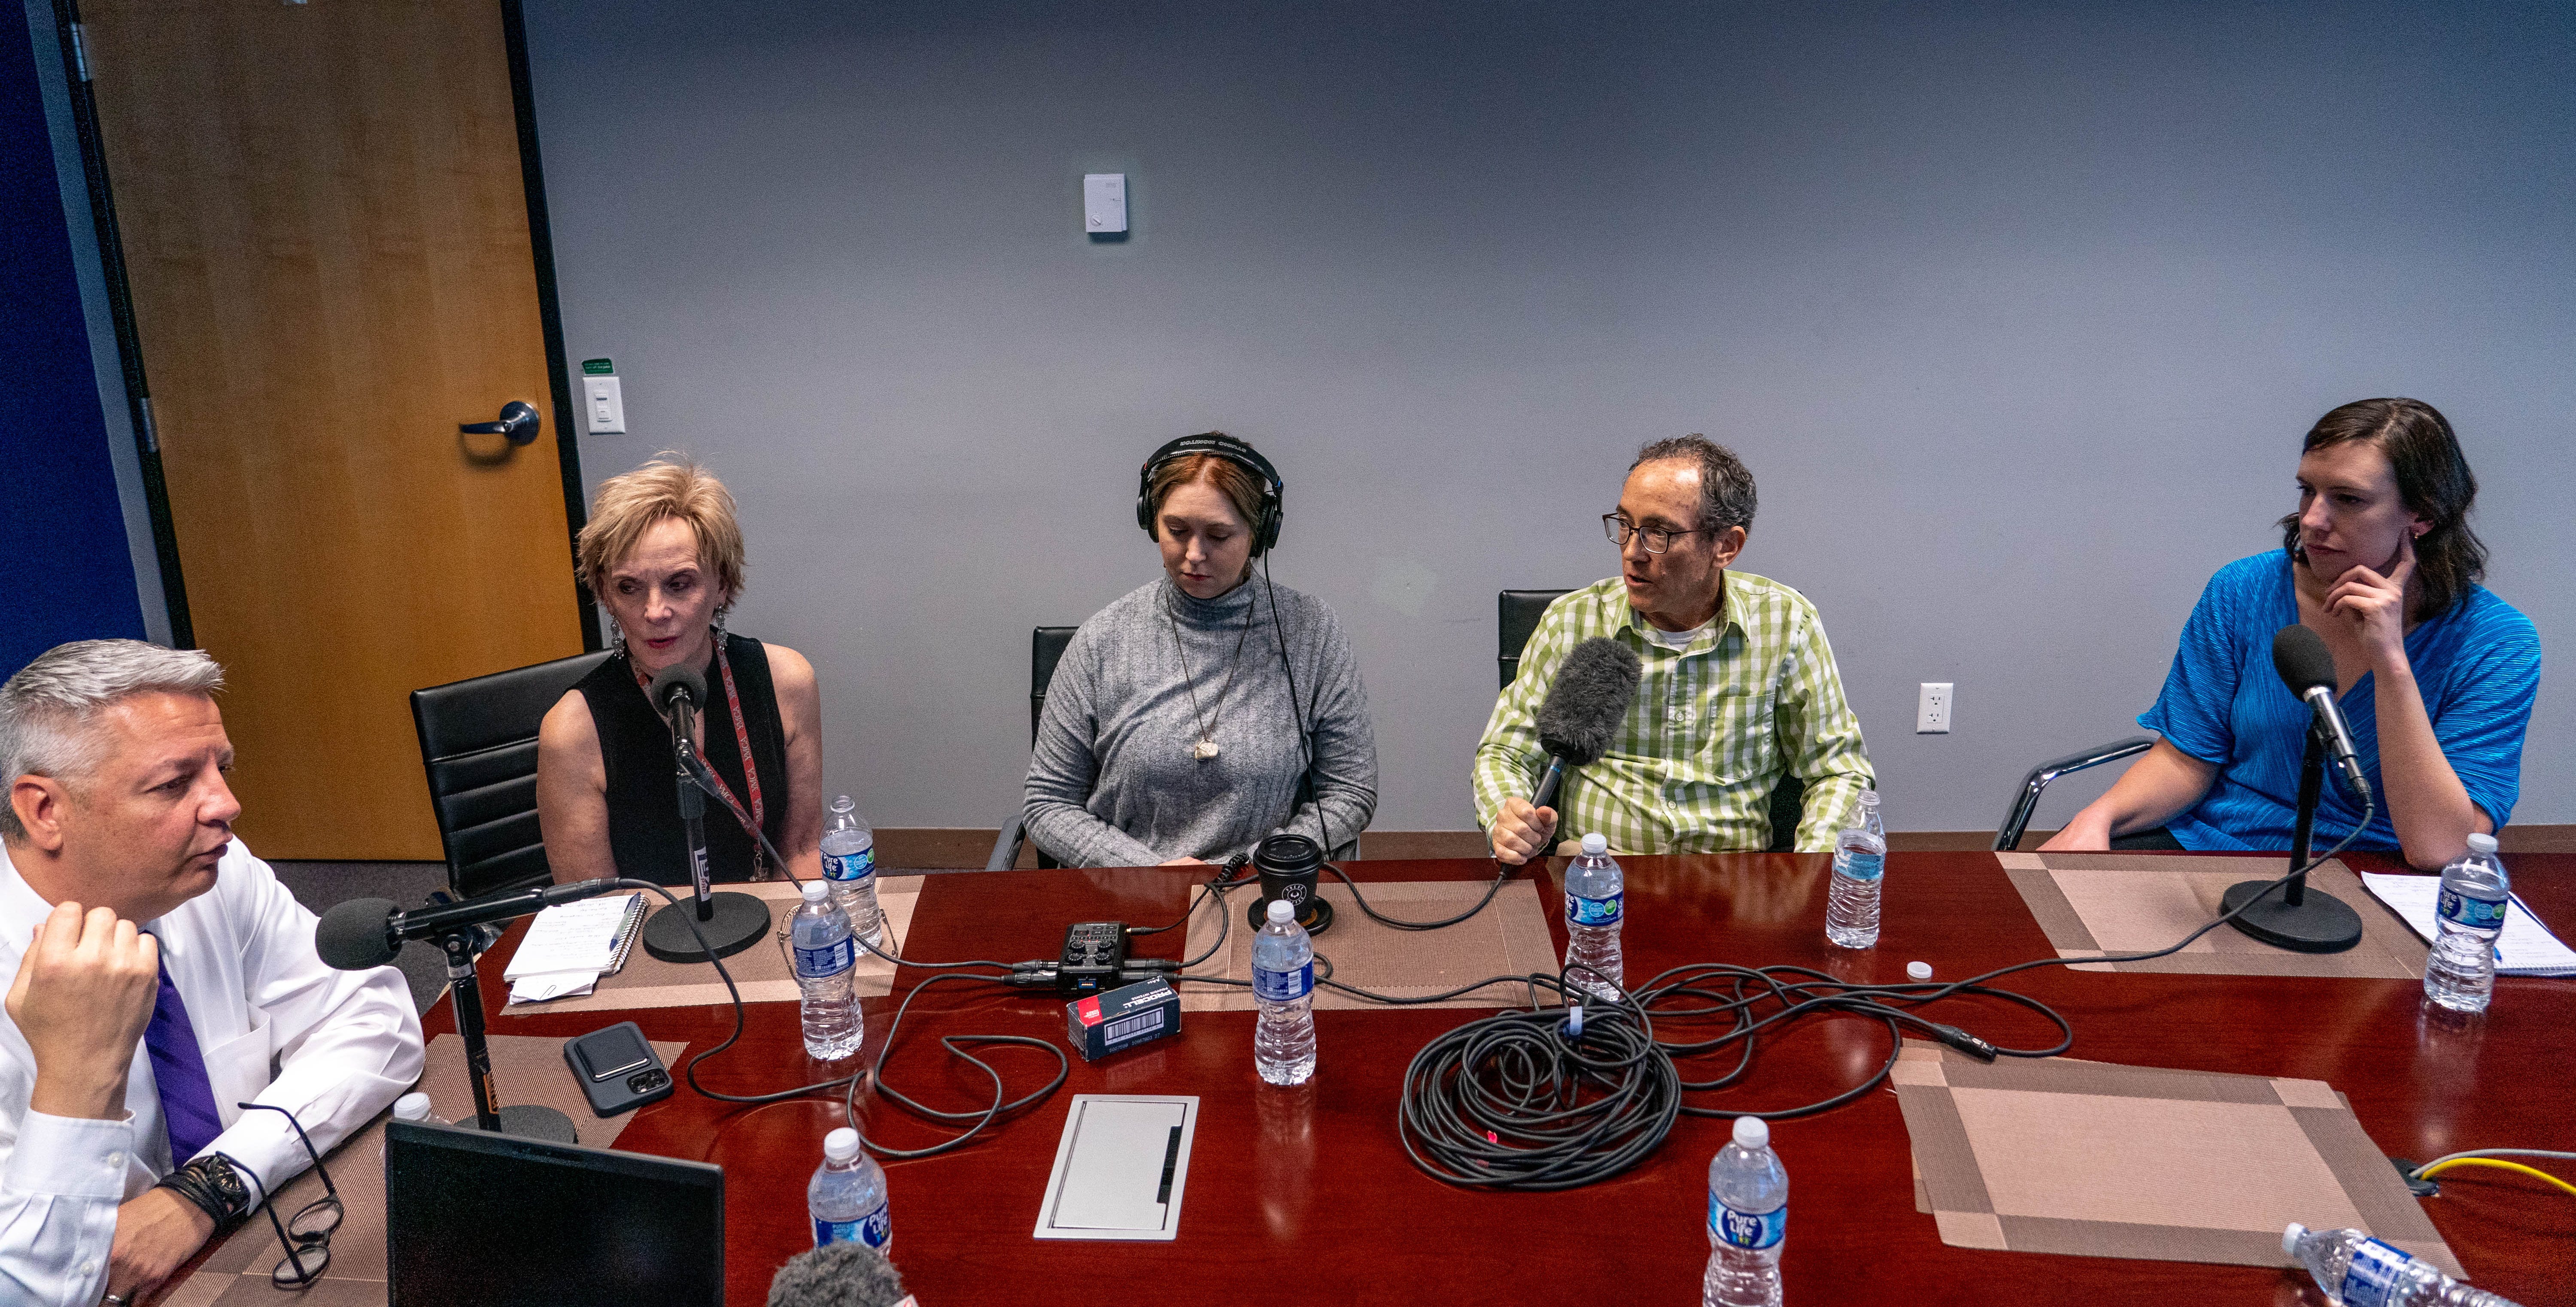 Arizona Republic staffers Ronald J. Hansen, left, Mary Jo Pitzl, Kaely Monahan, Ray Stern and Stacey Barchenger record an episode of The Gaggle at the Republic newsroom in Phoenix on Dec. 15, 2022.